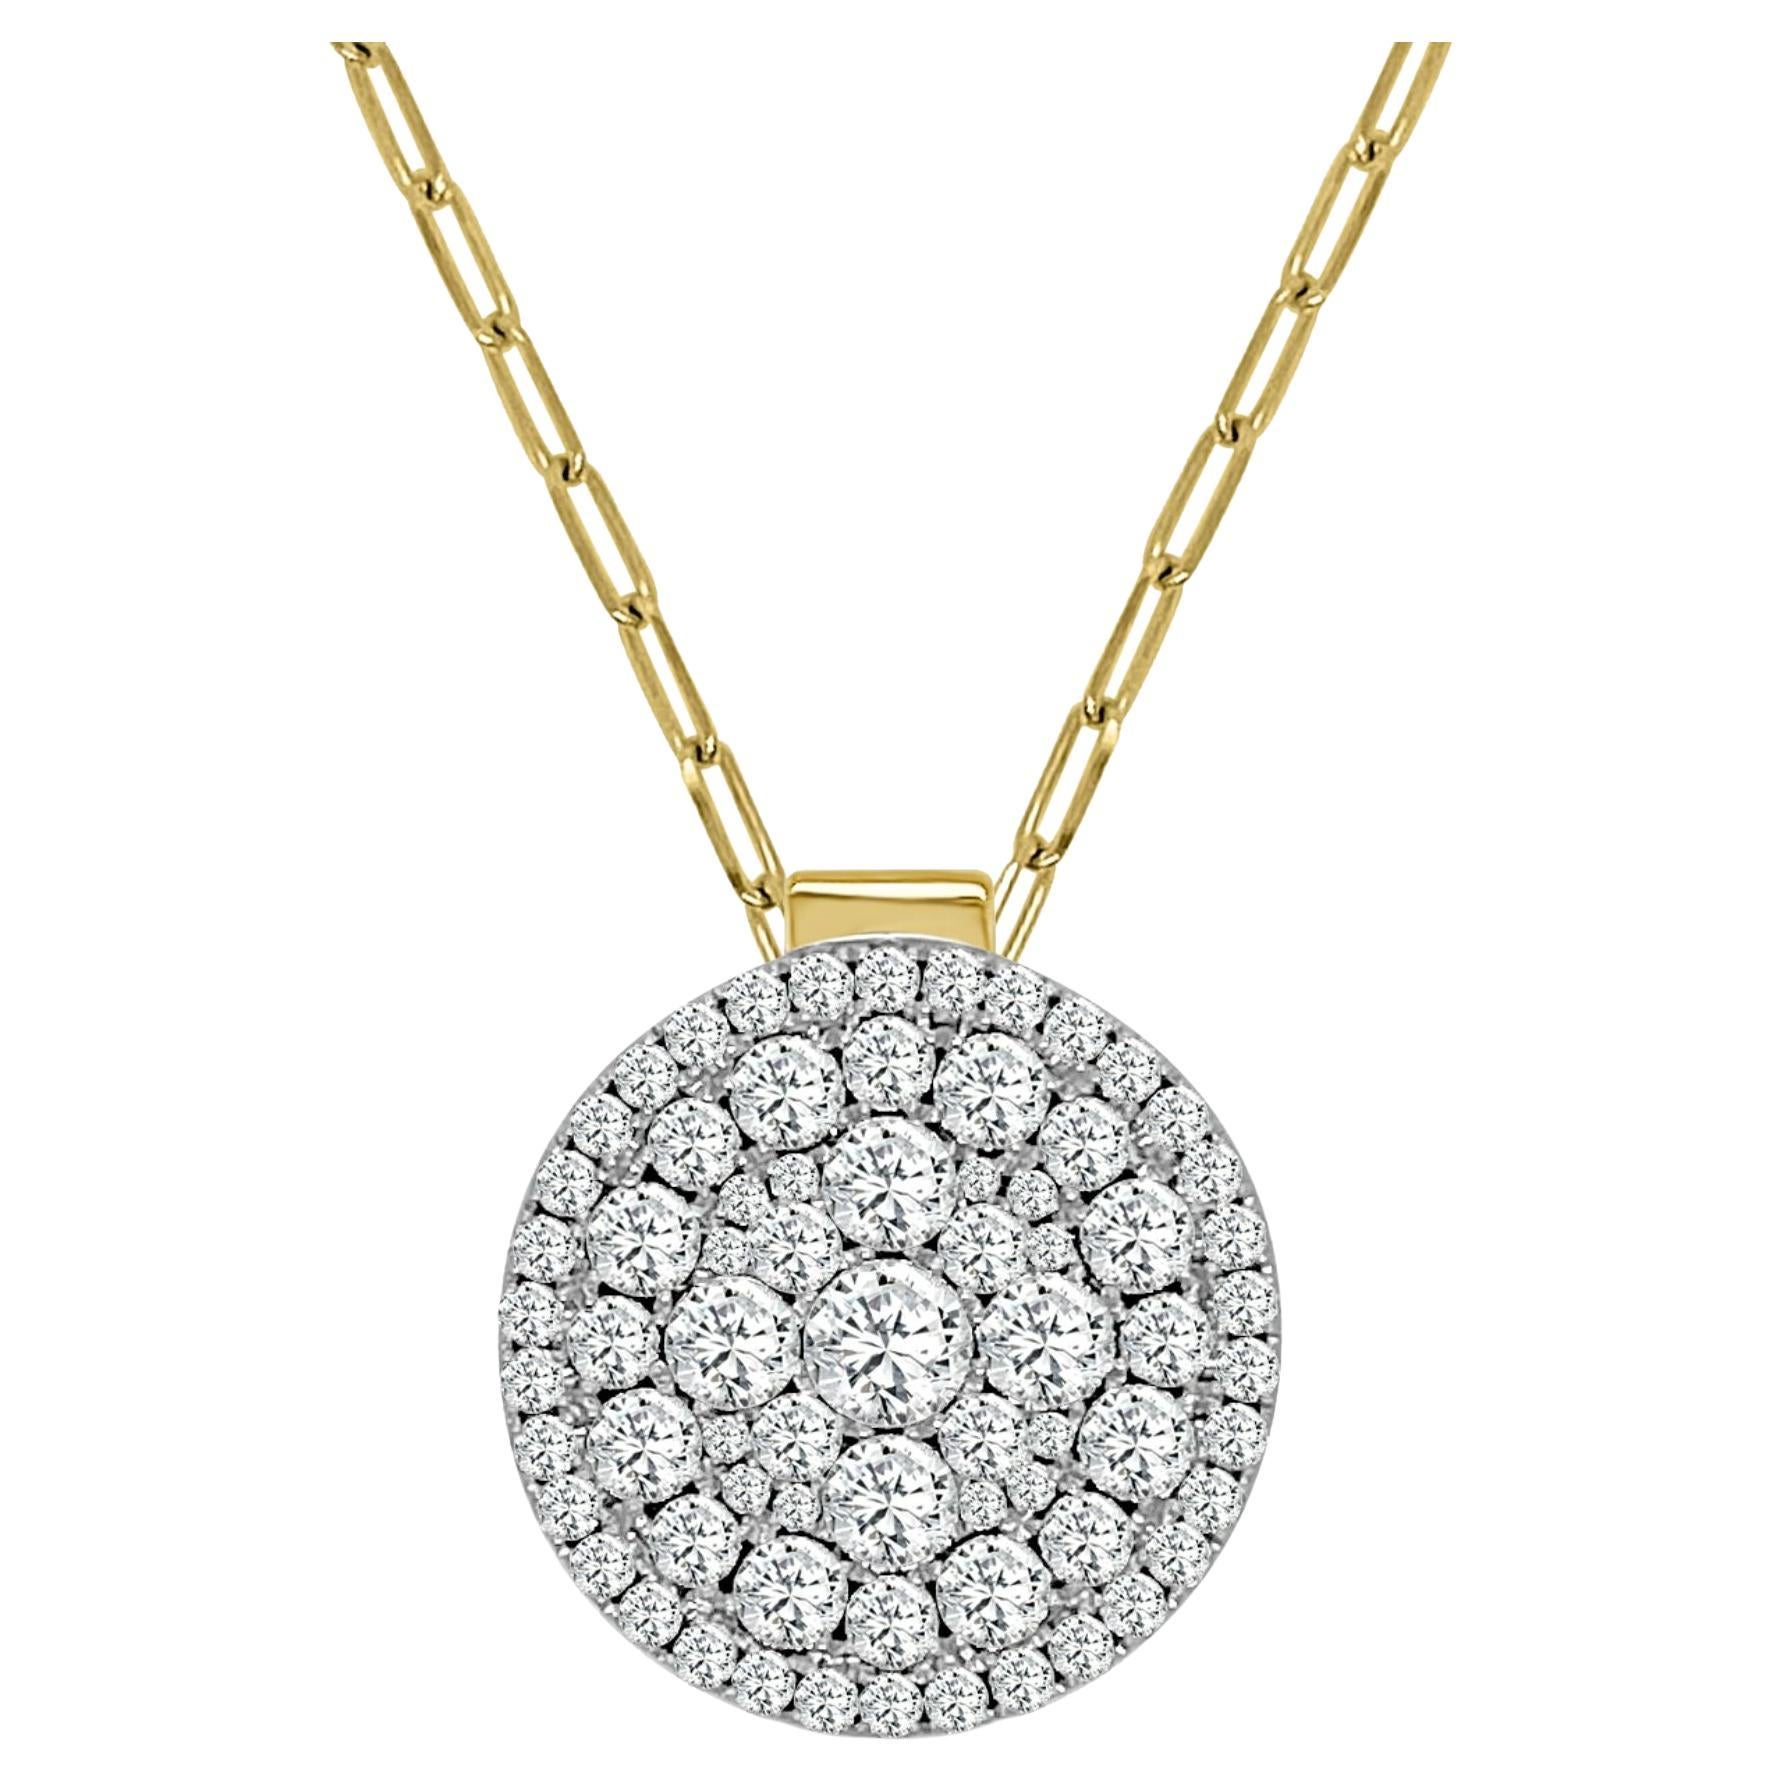 ”Large 2” Round Firenze II Diamond Pendant with Paper Clip Chain